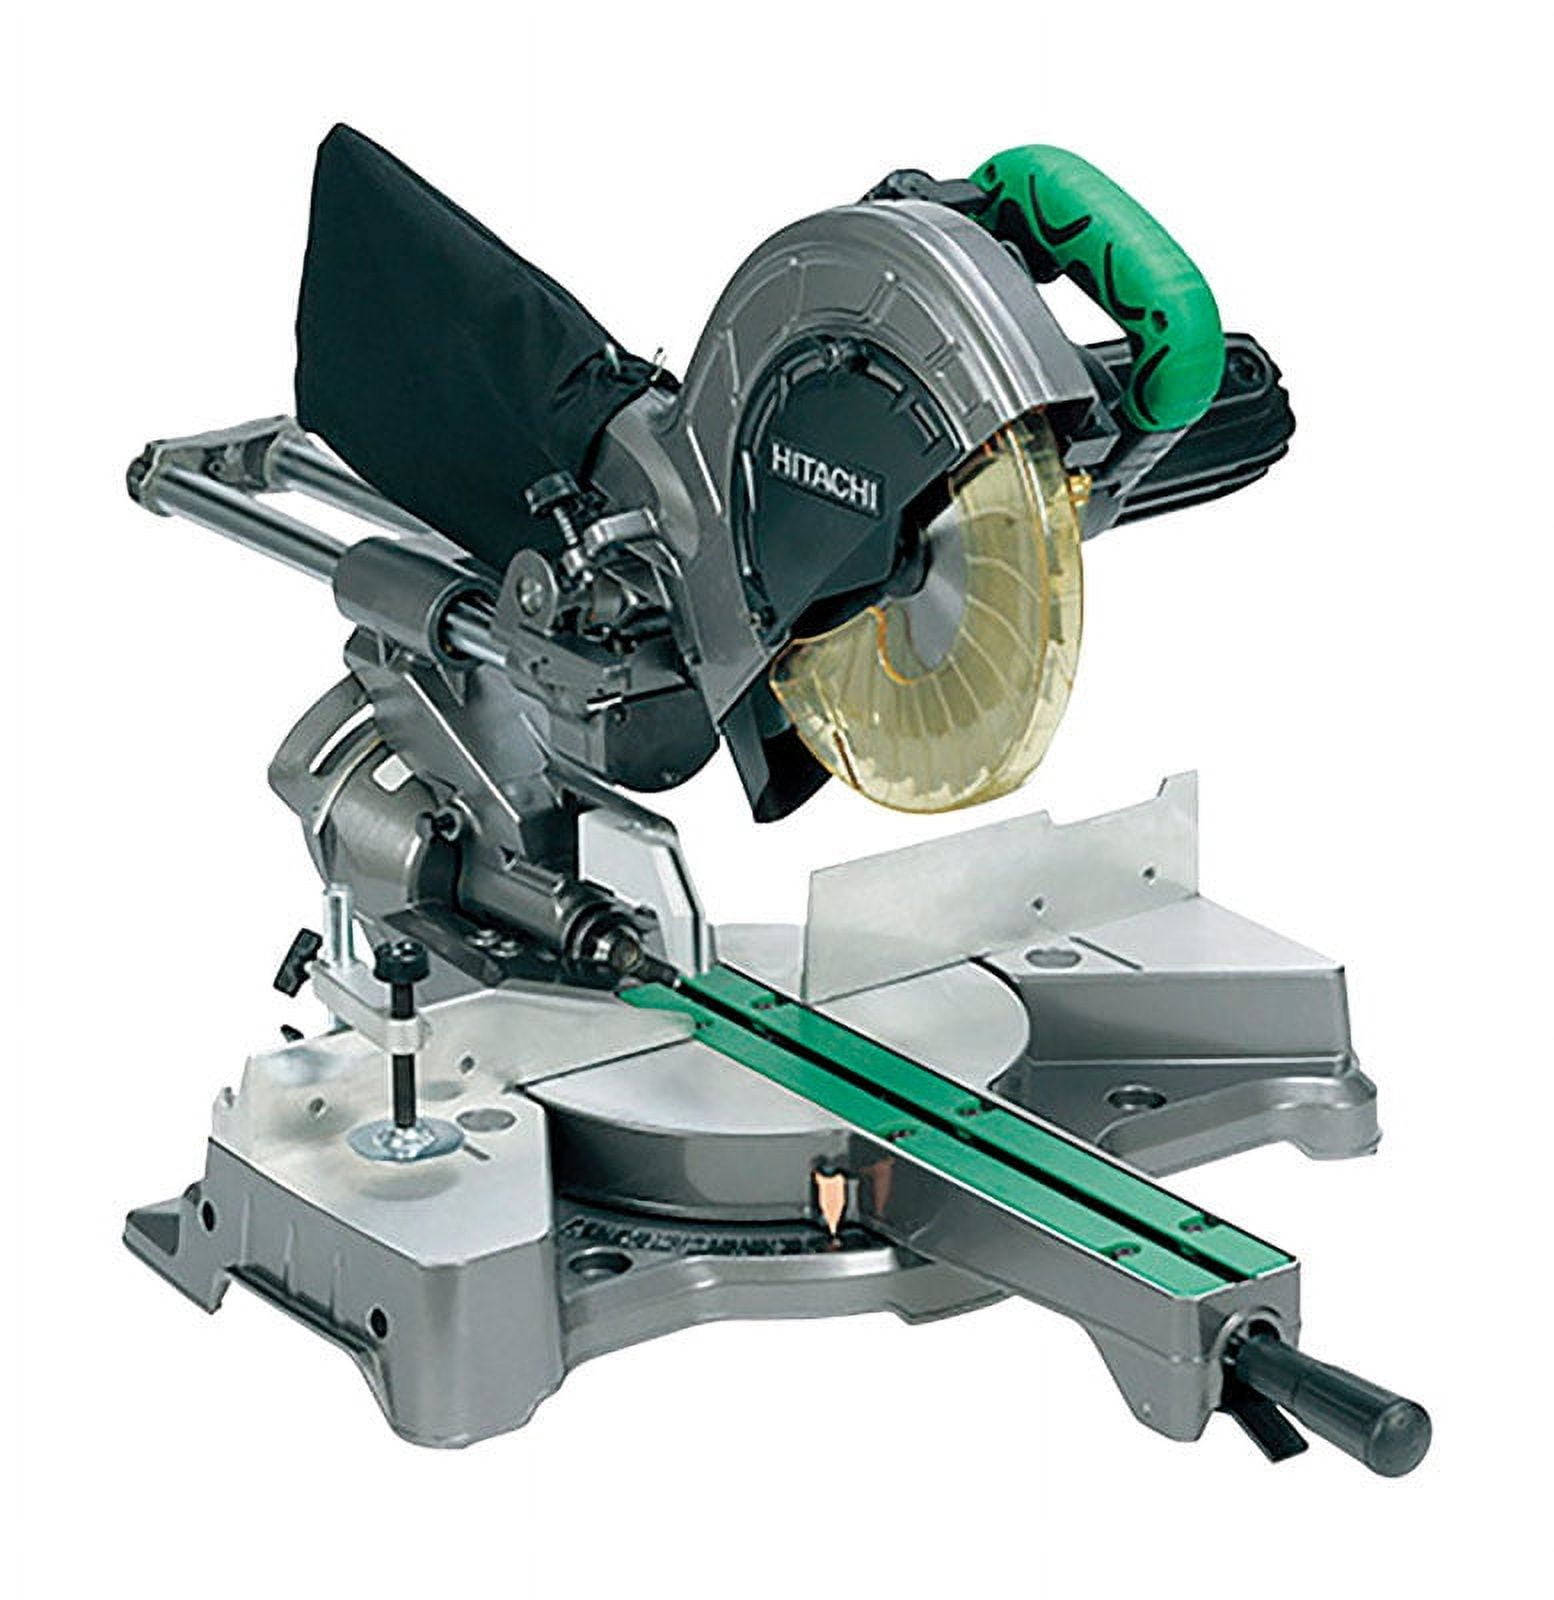 Online Shopping for Housewares, Baby Gear, Health  more. Metabo-HPT  2221745 8.5 in. Corded 9.2 amp Compound Miter Saw 120V  5500 RPM